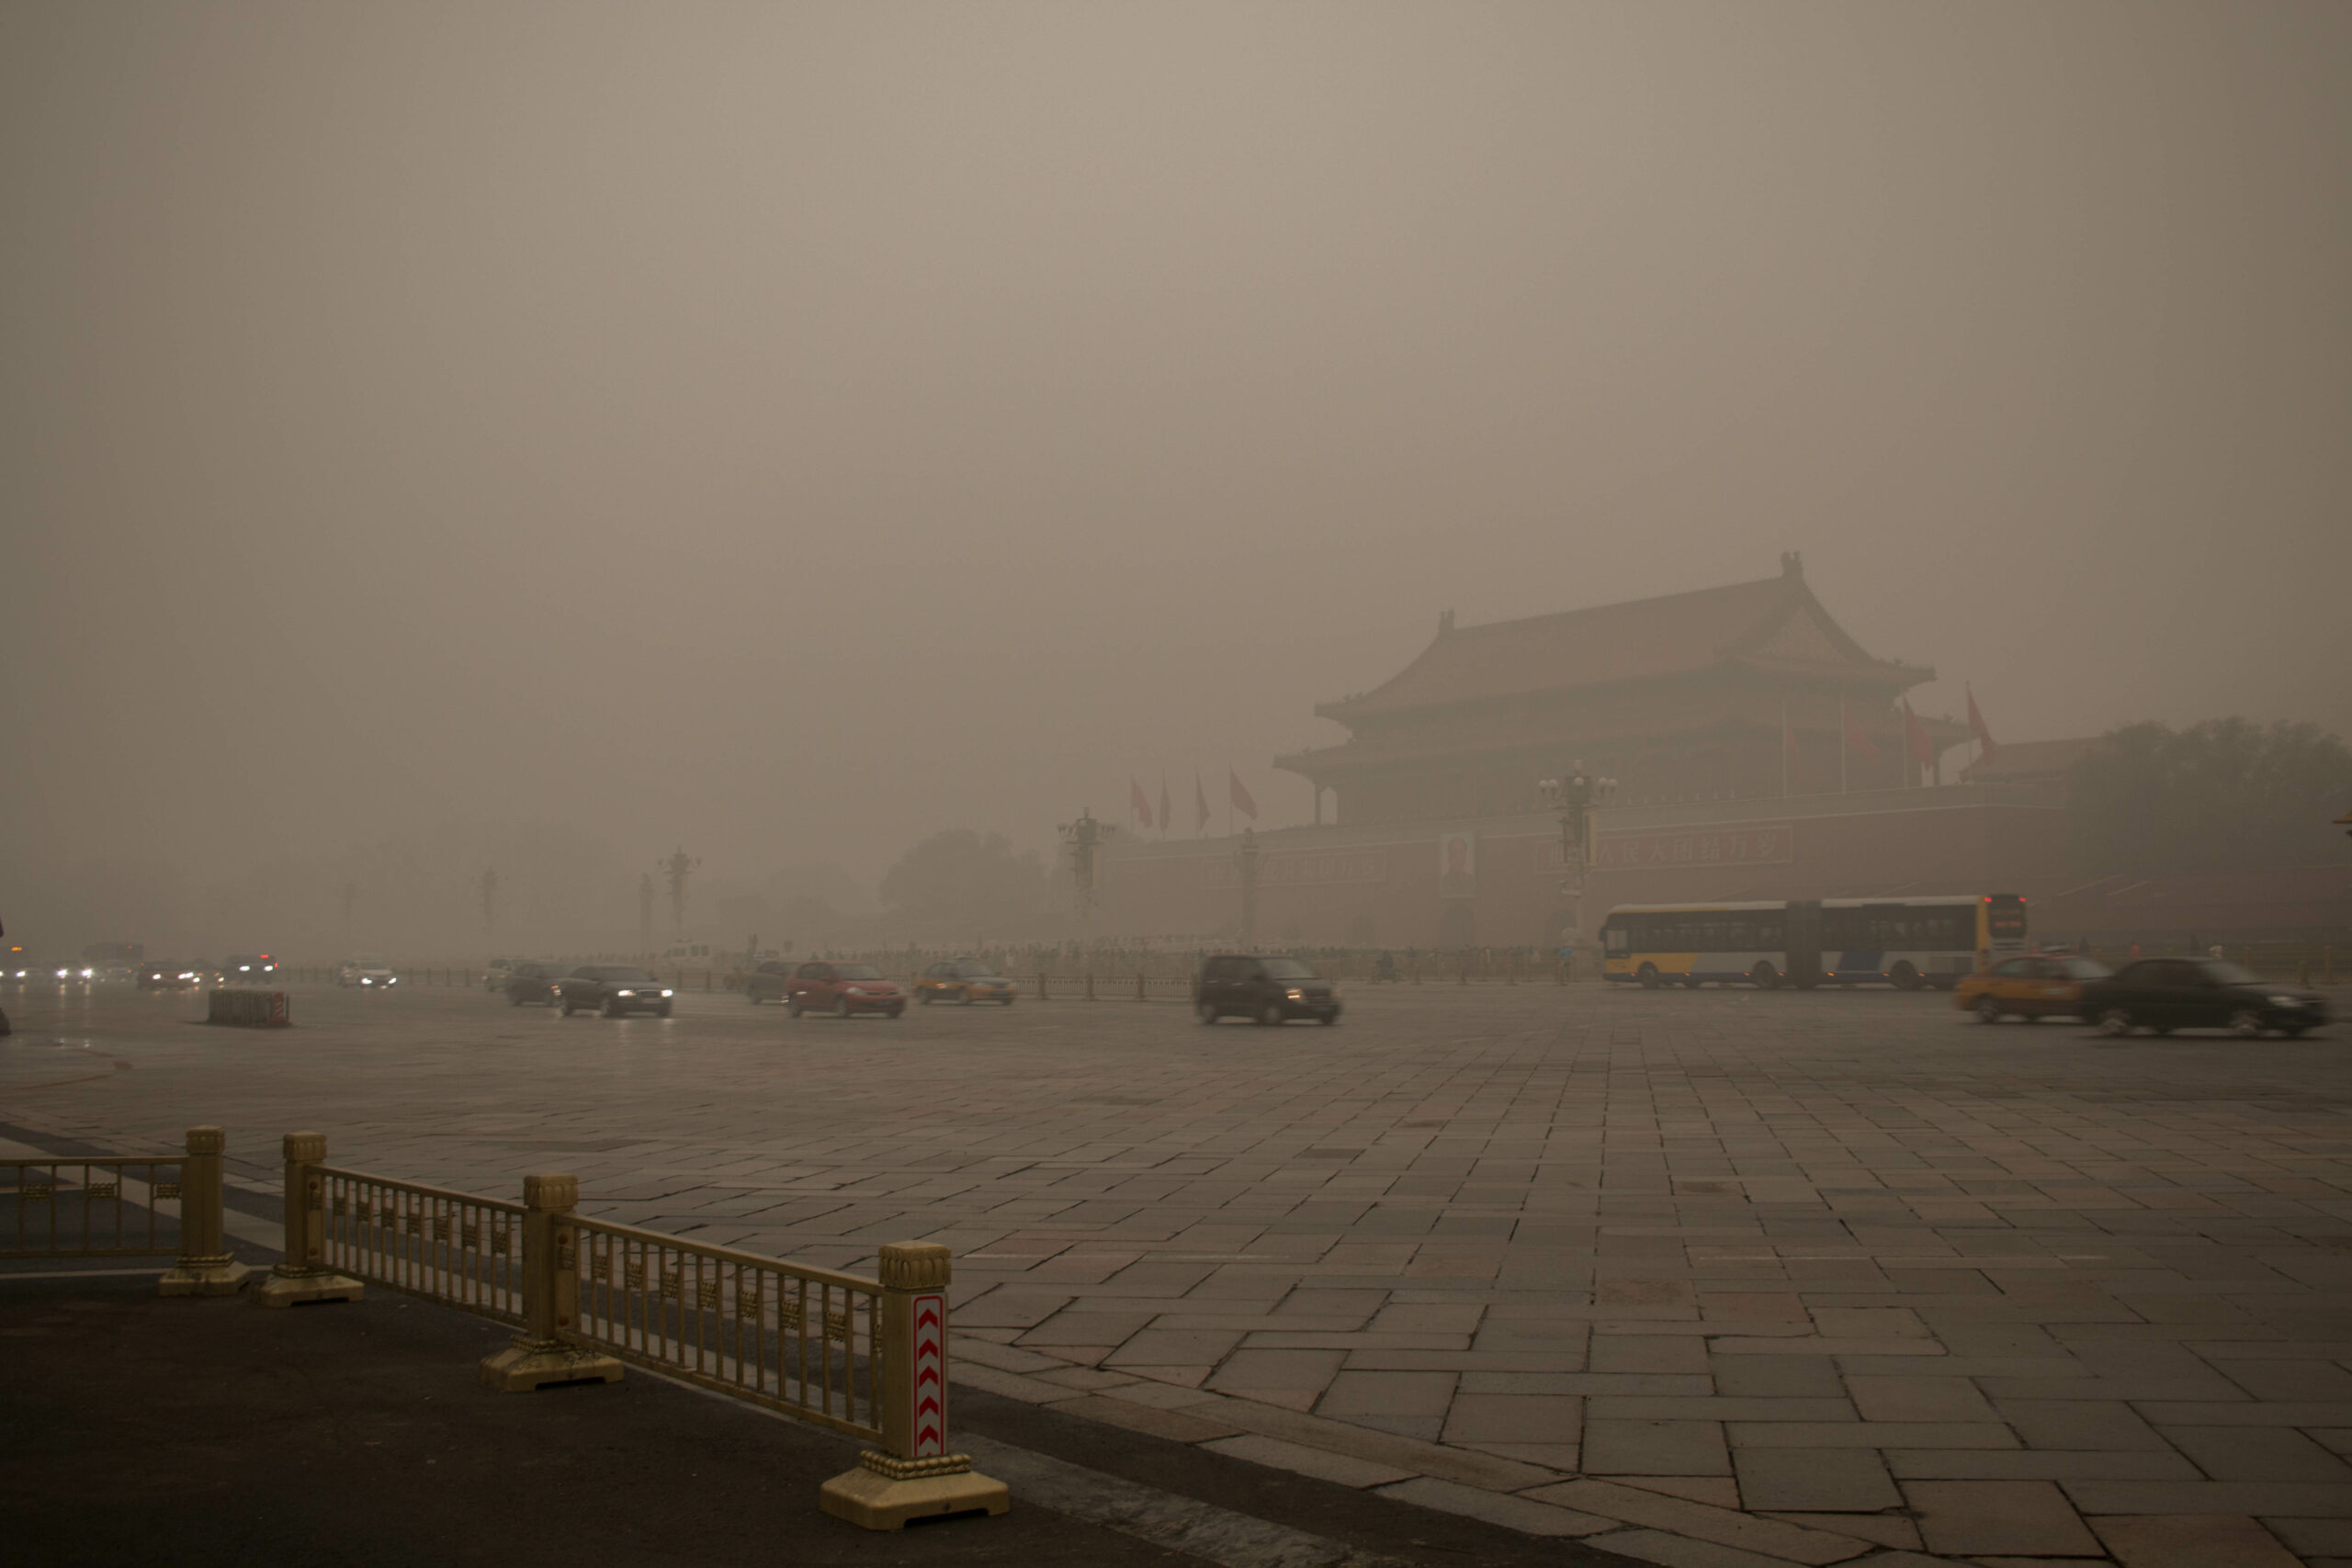 Why is there smog in China?